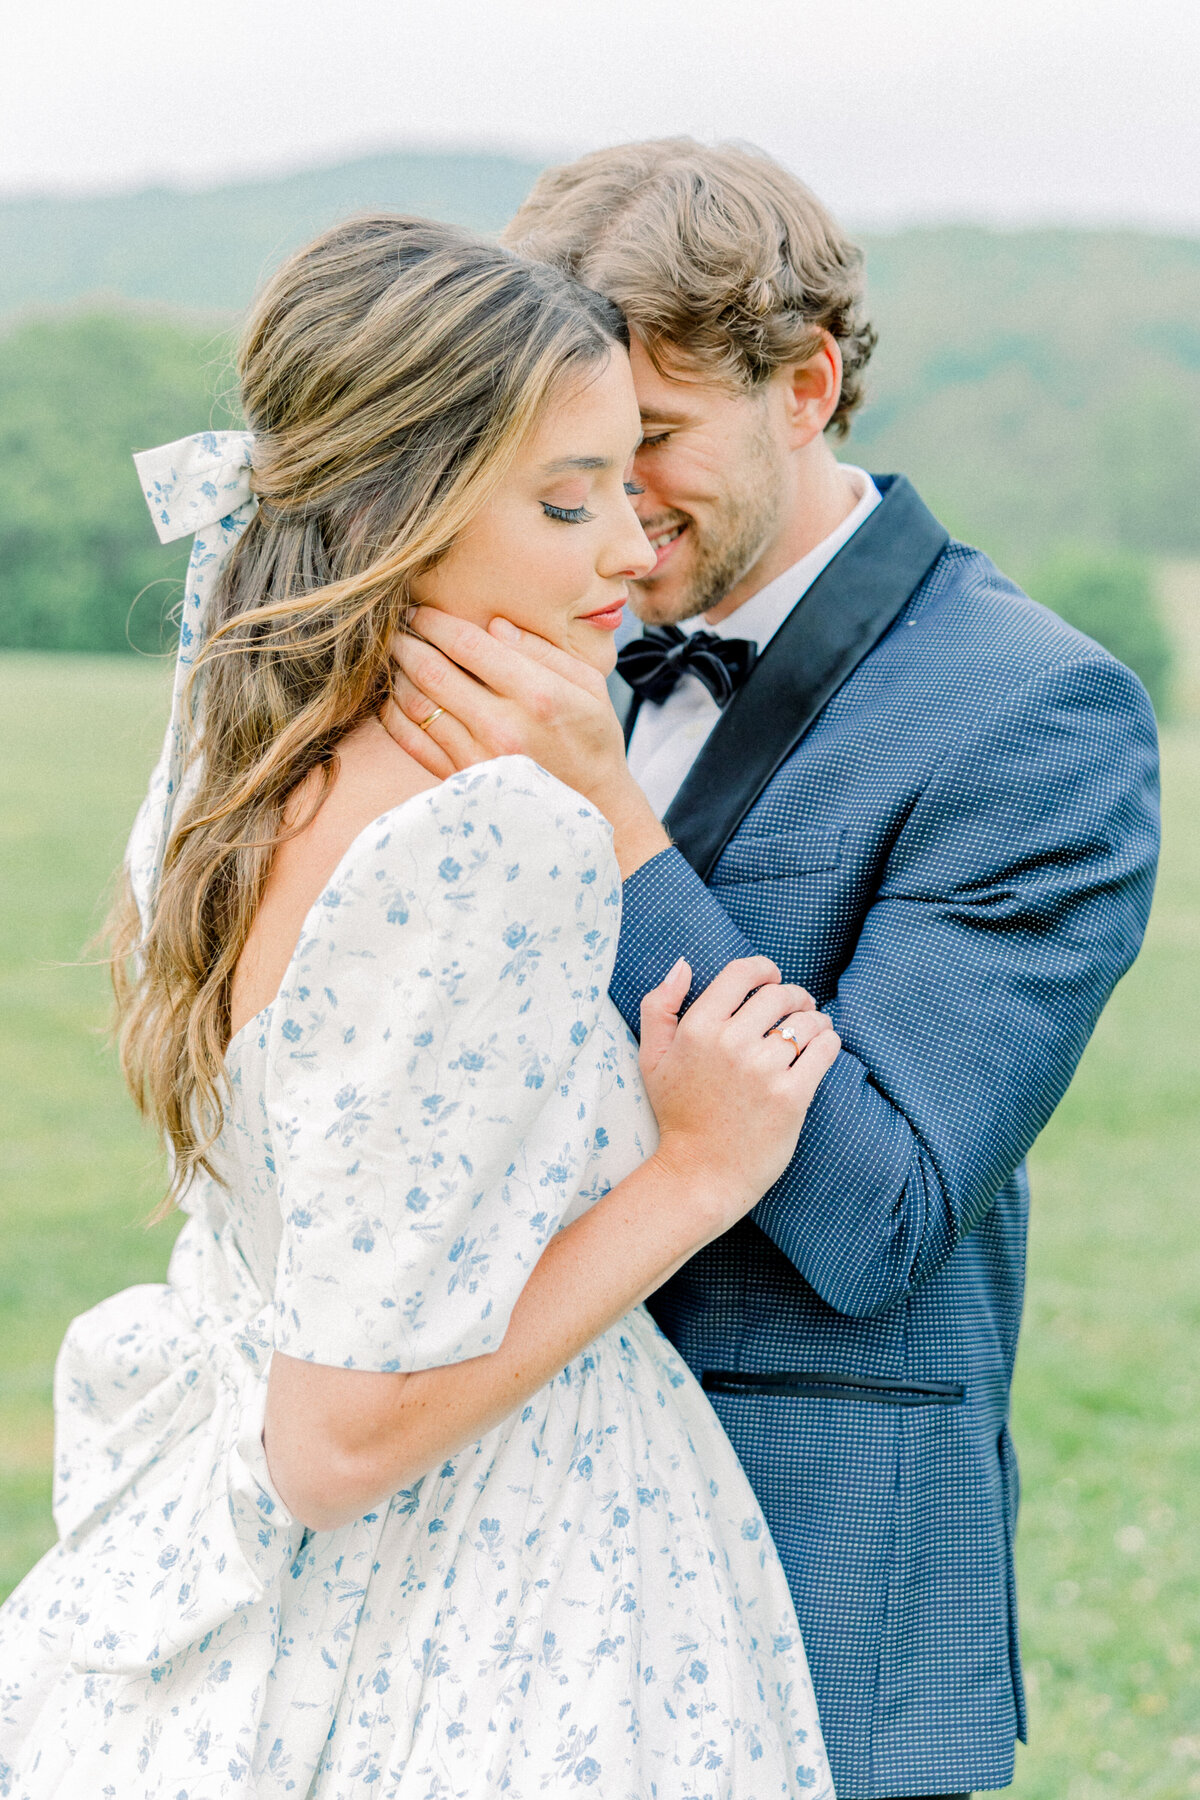 Groom nuzzling bride, editorial inspired image at the ivy rose barn